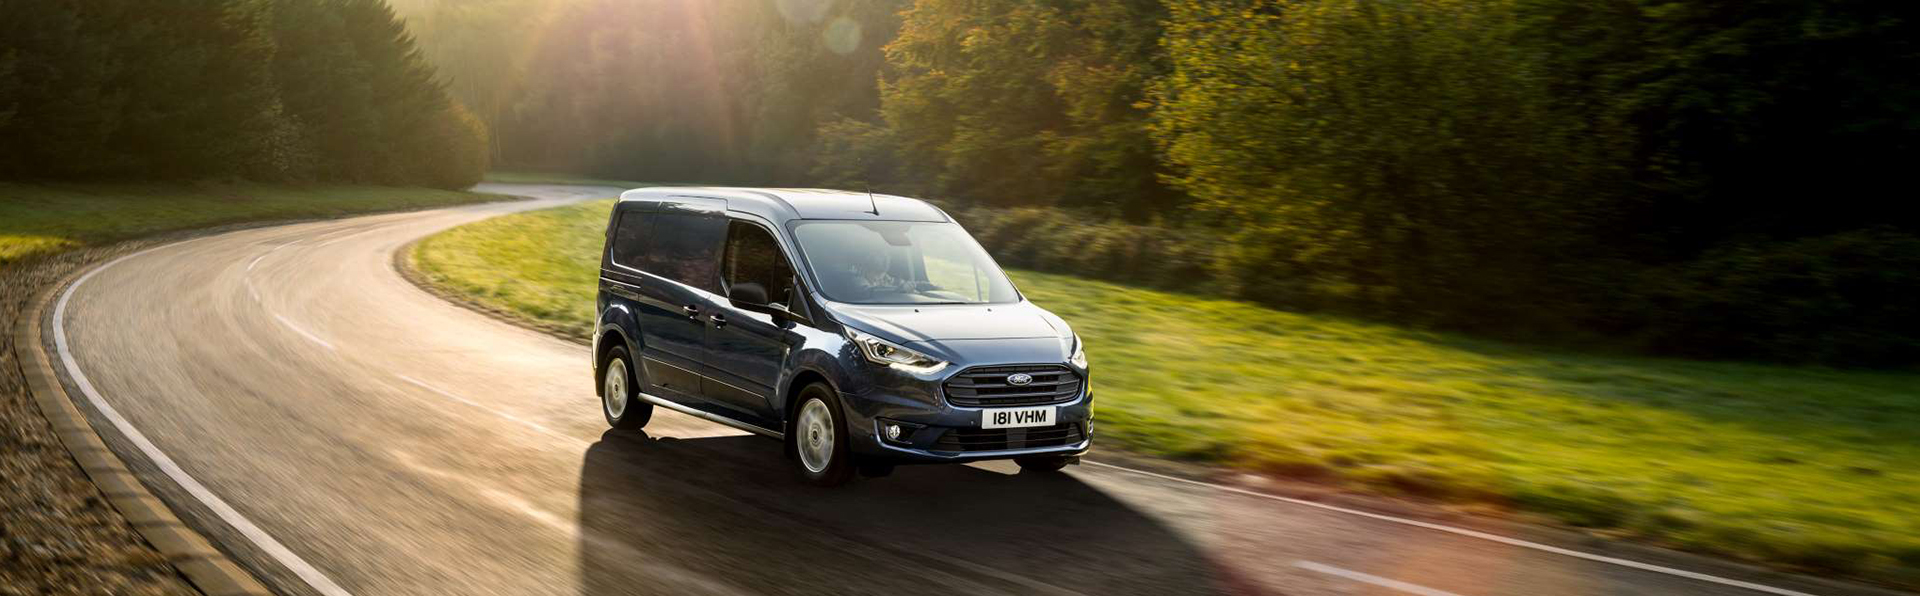 10 Reasons Why Leasing a Van is a Good Option